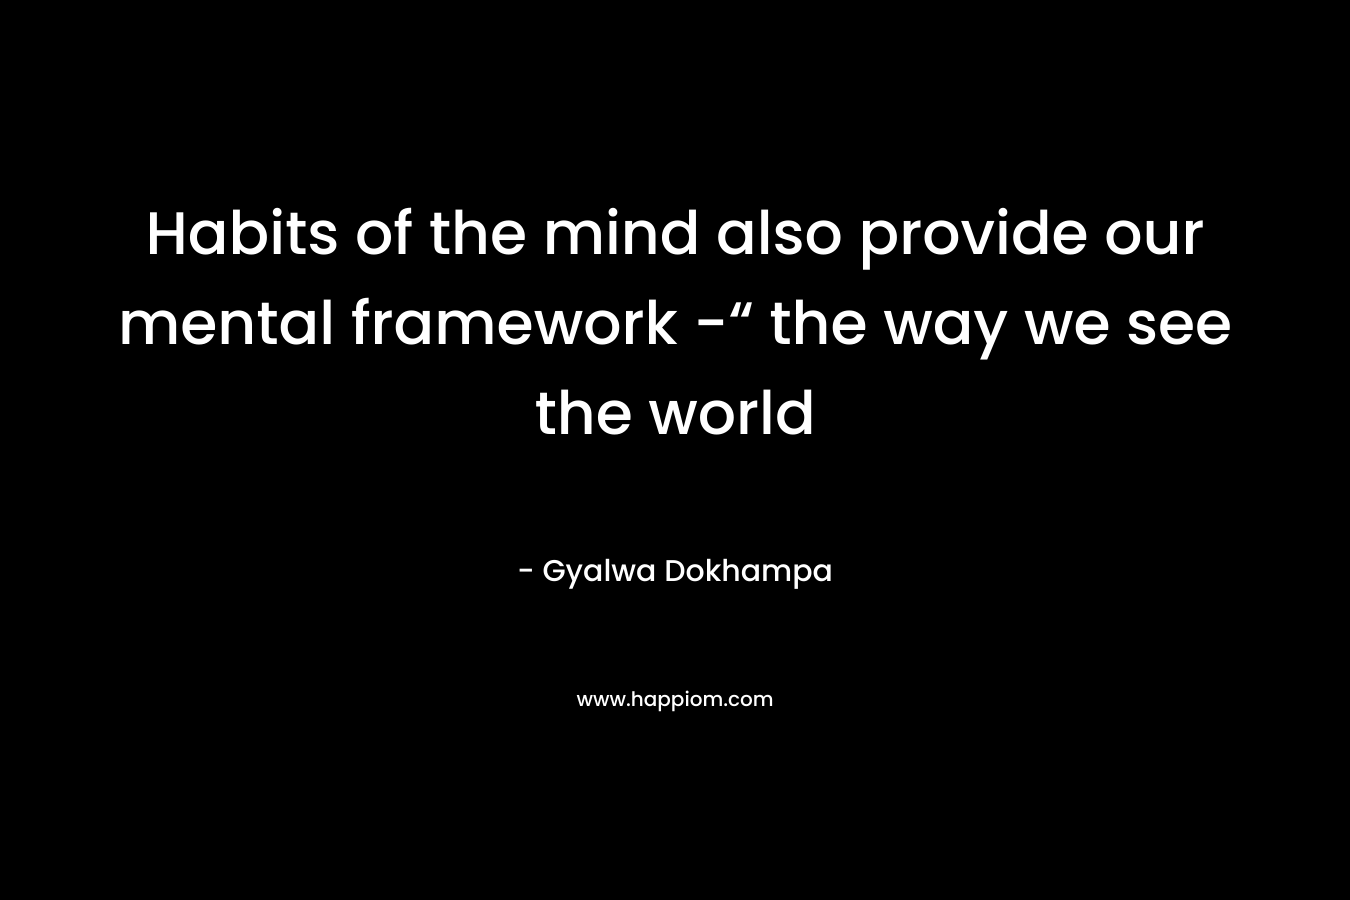 Habits of the mind also provide our mental framework -“ the way we see the world